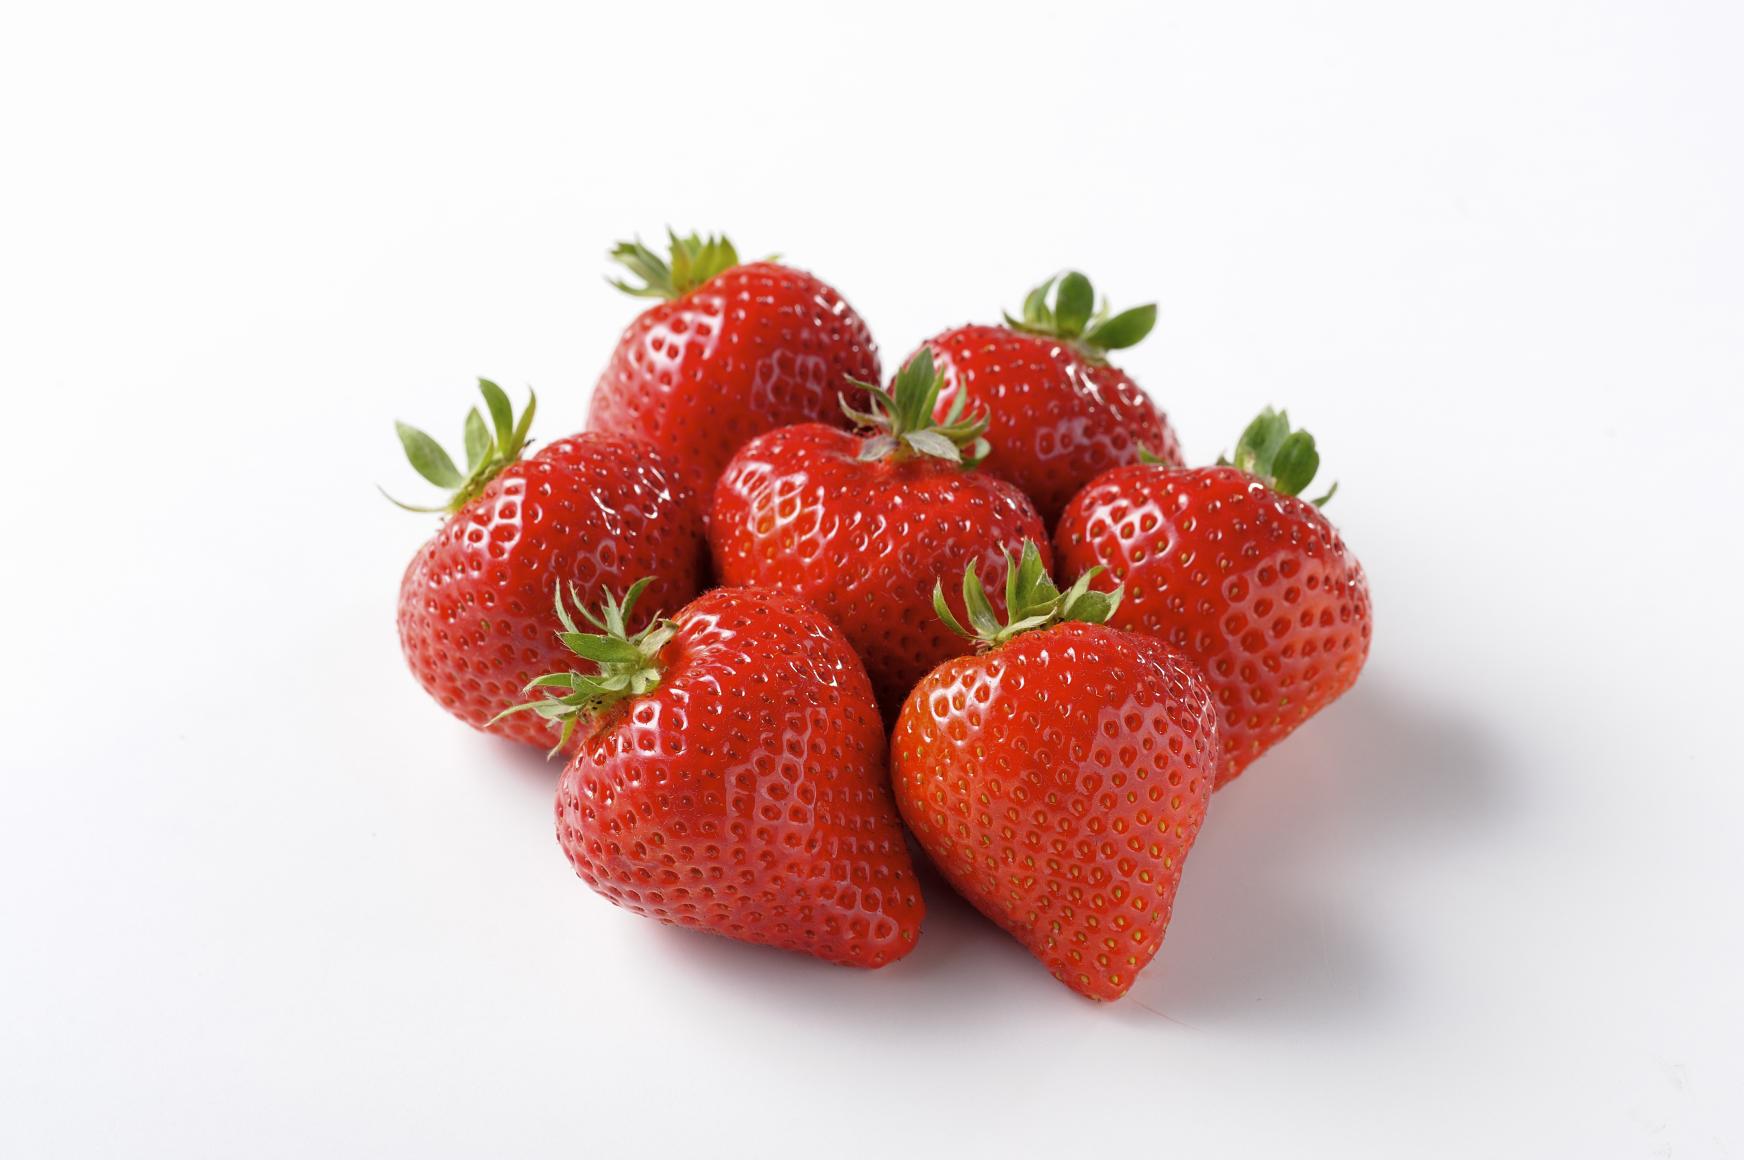 Confections made with the Amaou brand strawberries of Fukuoka-0